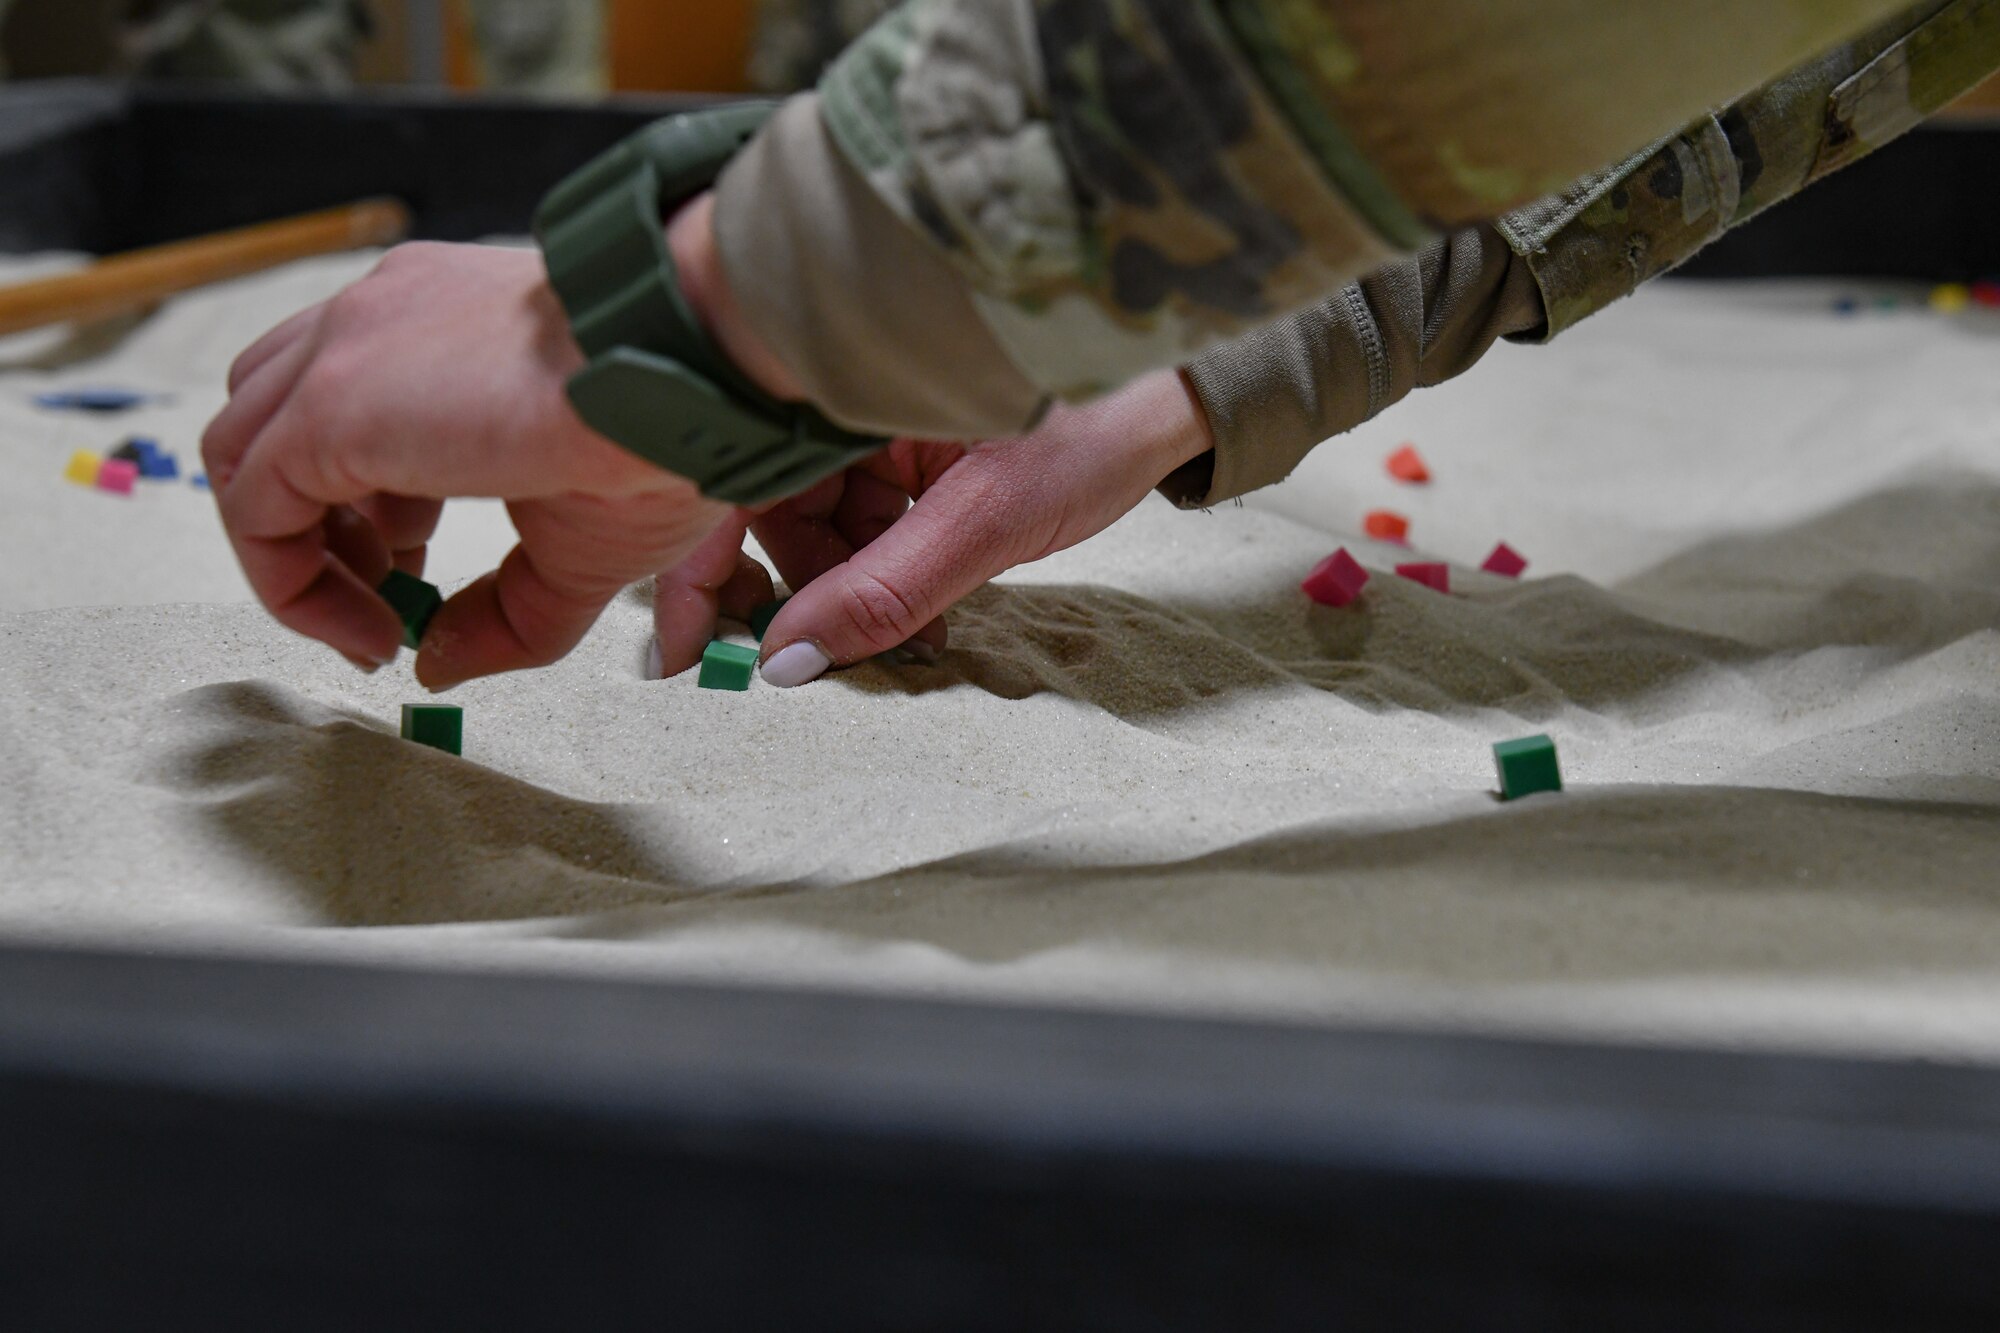 Senior Airman Brianna Clay, an Integrated Defense Leadership Course cadre member assigned to the 349th Security Forces Squadron, Travis Air Force Base, California, demonstrates land navigation movements using sand and cubes on March 14, 2023, at Youngstown Air Reserve Station, Ohio.